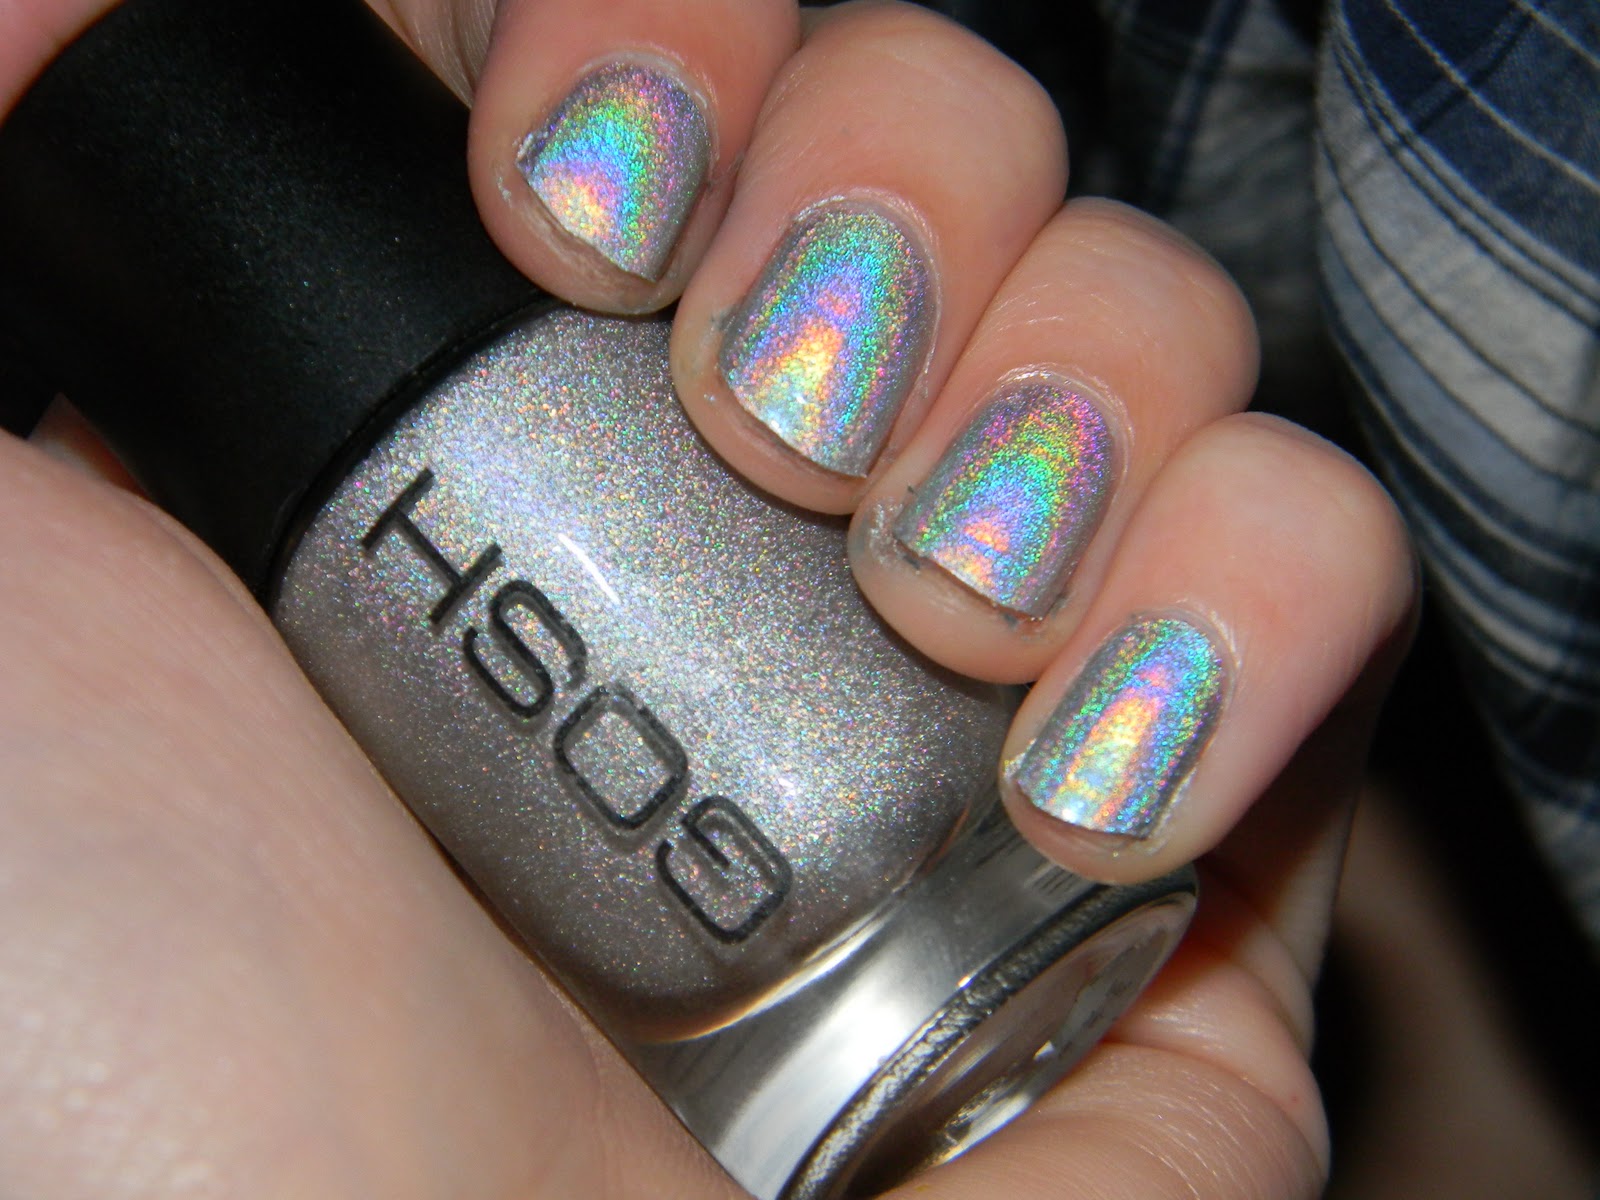 3. Top 10 Holographic Nail Art Shapes You Need to Try - wide 11